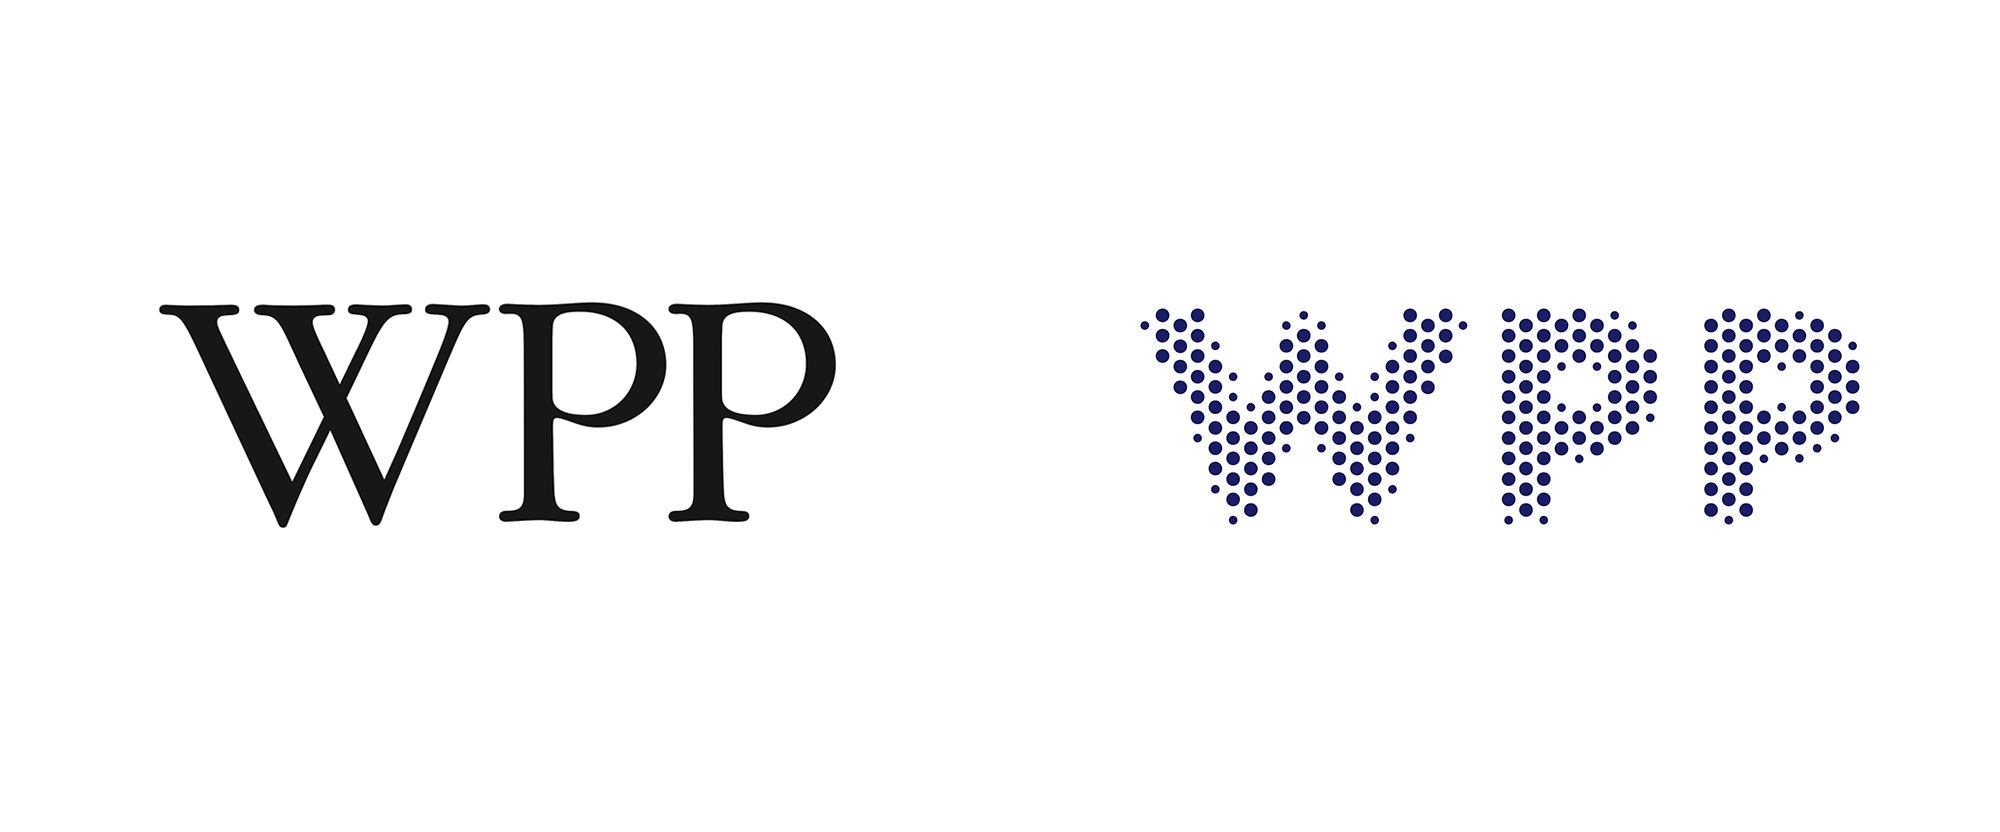 New Logo and Identity for WPP by Landor and Superunion